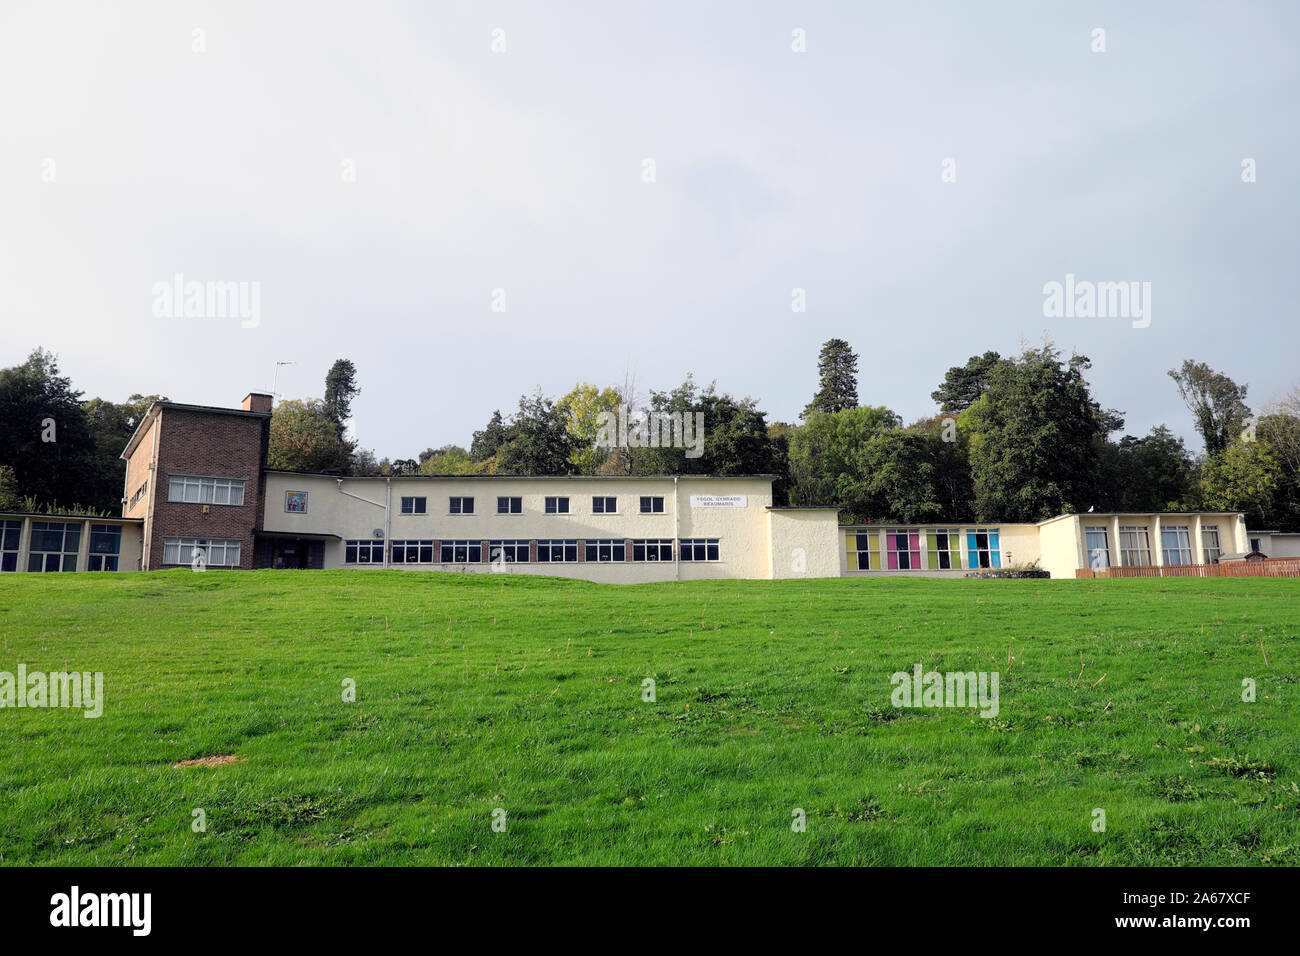 Ysgol Gynradd Beaumaris primary school exterior view of building destined for closure Beaumaris Anglesey Wales UK  KATHY DEWITT Stock Photo